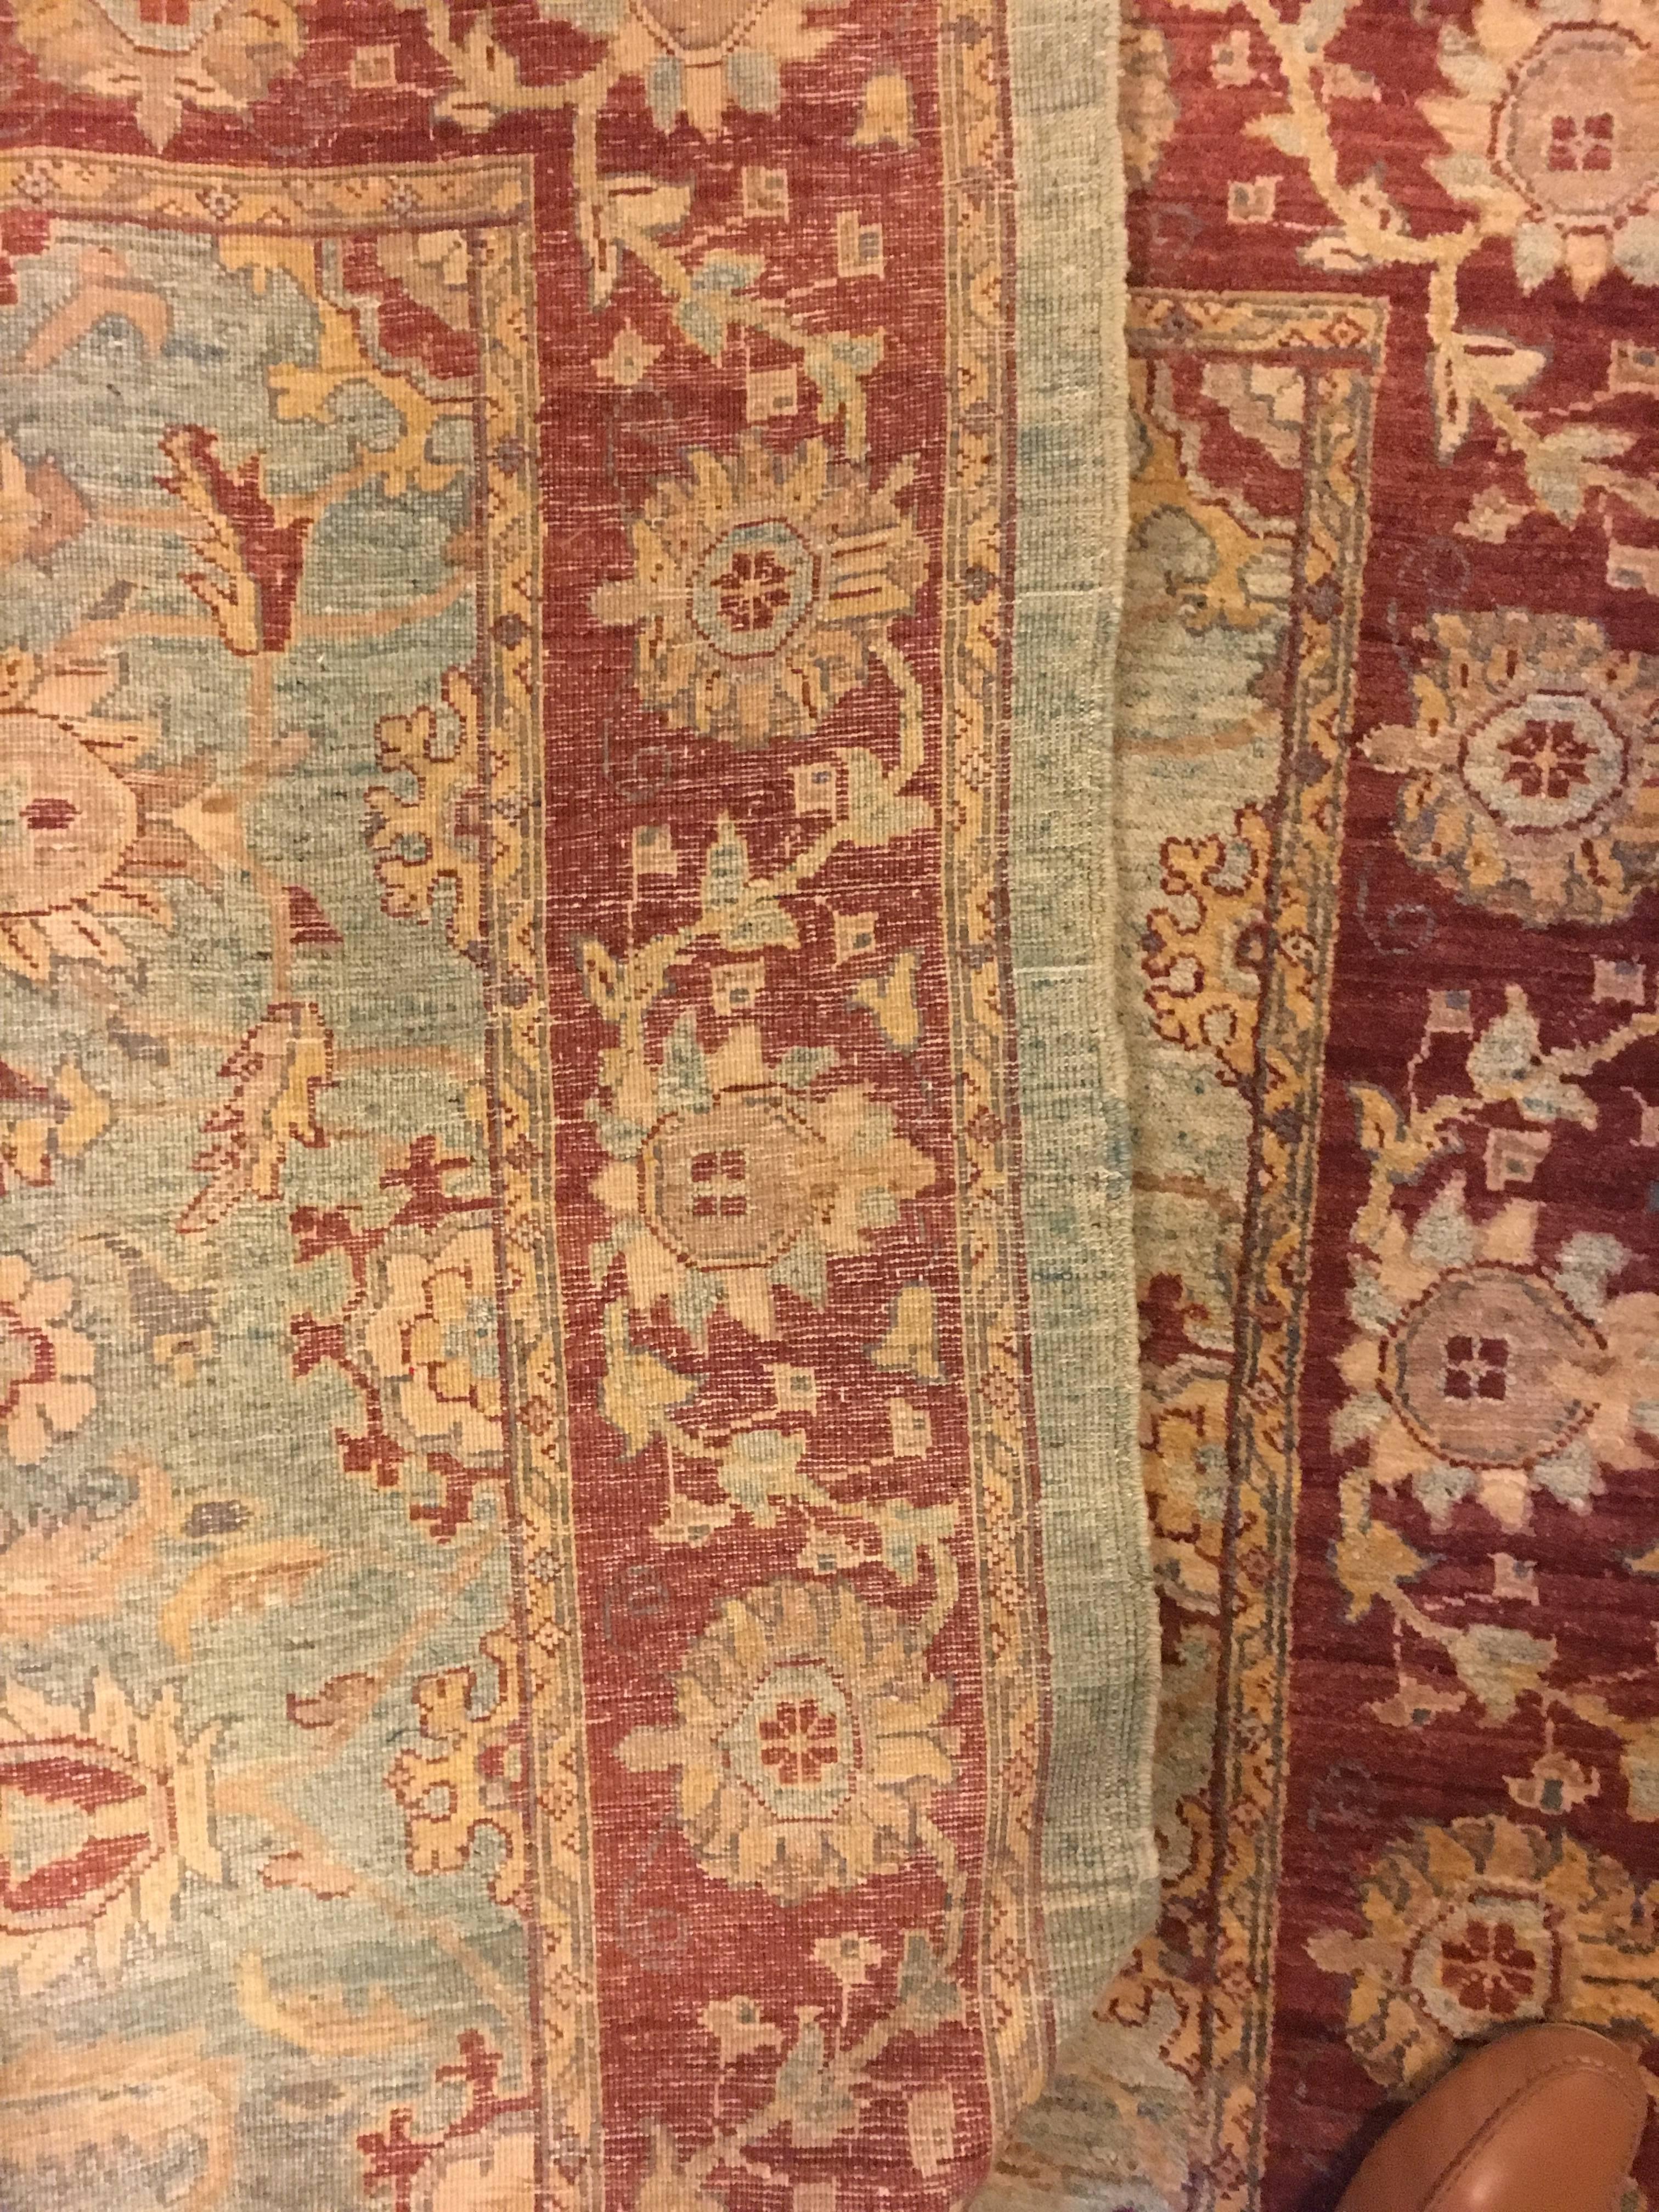 A finely knotted coffee or Foyar oriental carpet. This highly desirable carpet is sure to make a sparkling appearance in the foyer of ones home. Perhaps add style and flair under that coffee table or simply throw it at the foot of the bed. The rich